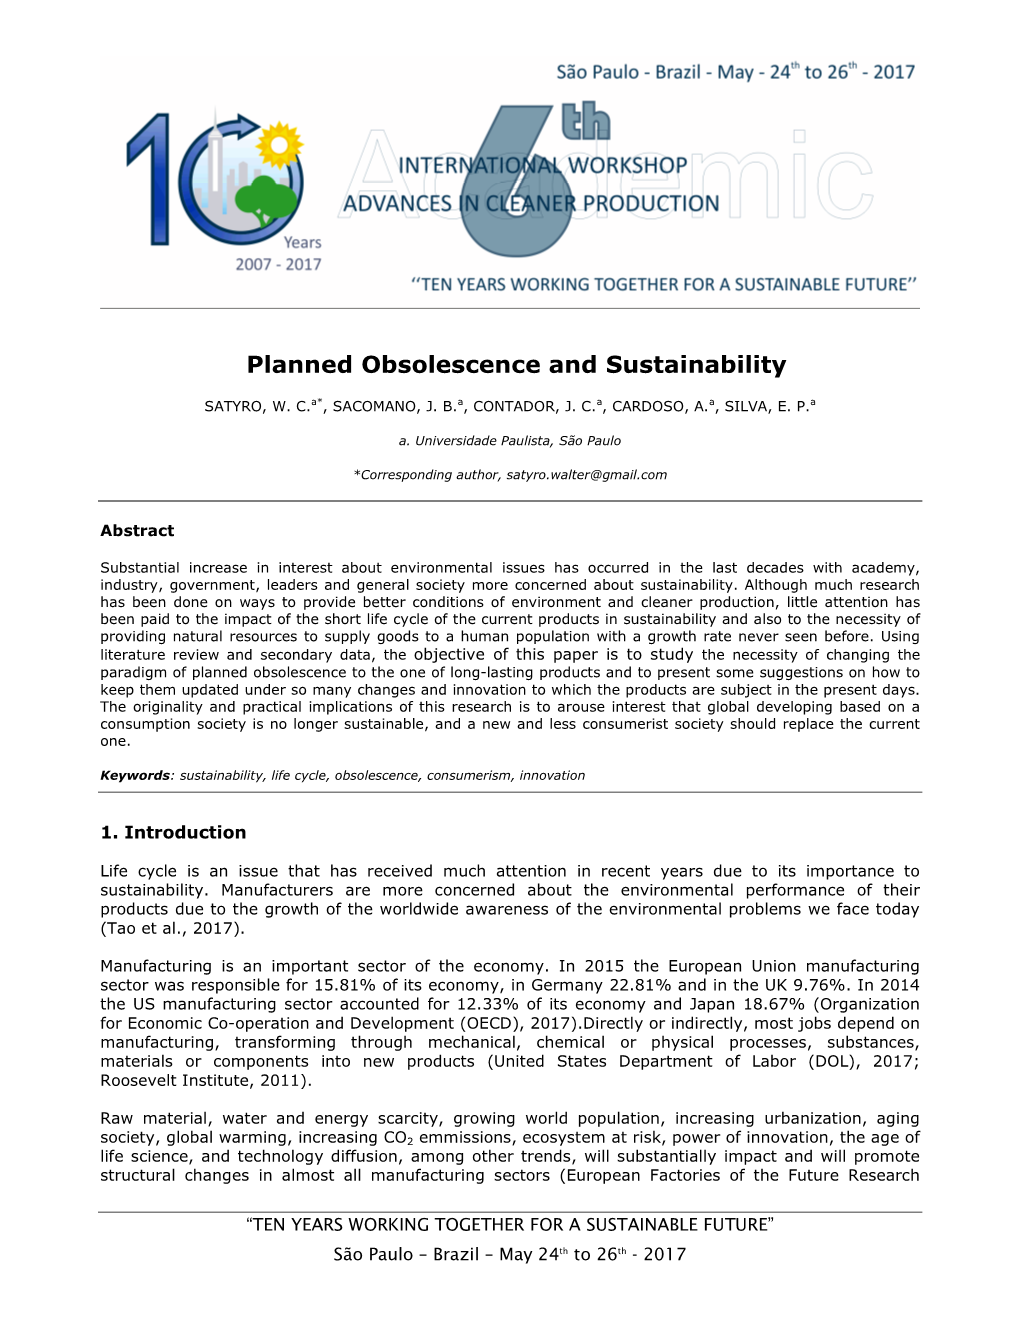 Planned Obsolescence and Sustainability